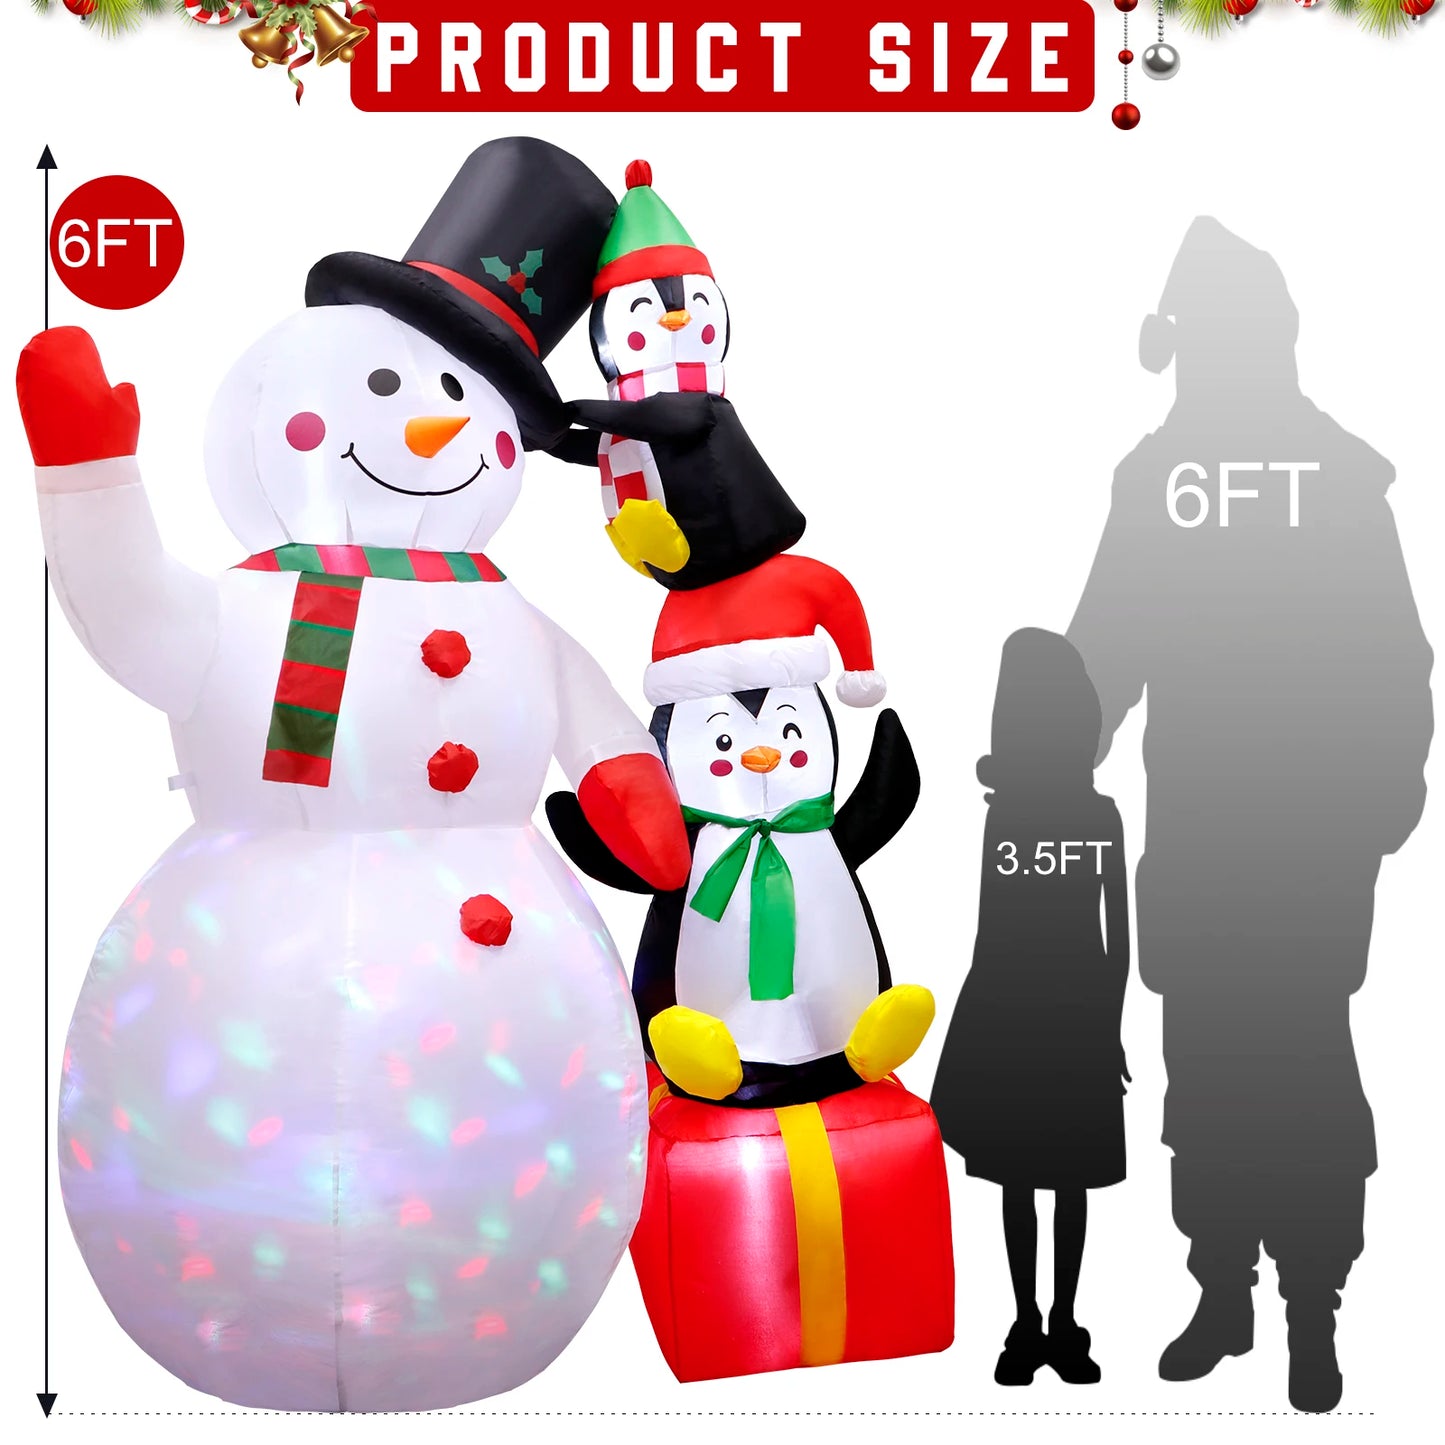 6ft Charming Inflatable Snowman Penguins for Christmas - Festive Yard Decor with Colorful Rotating LED Lights - Outdoor Holiday Display ShopOnlyDeal